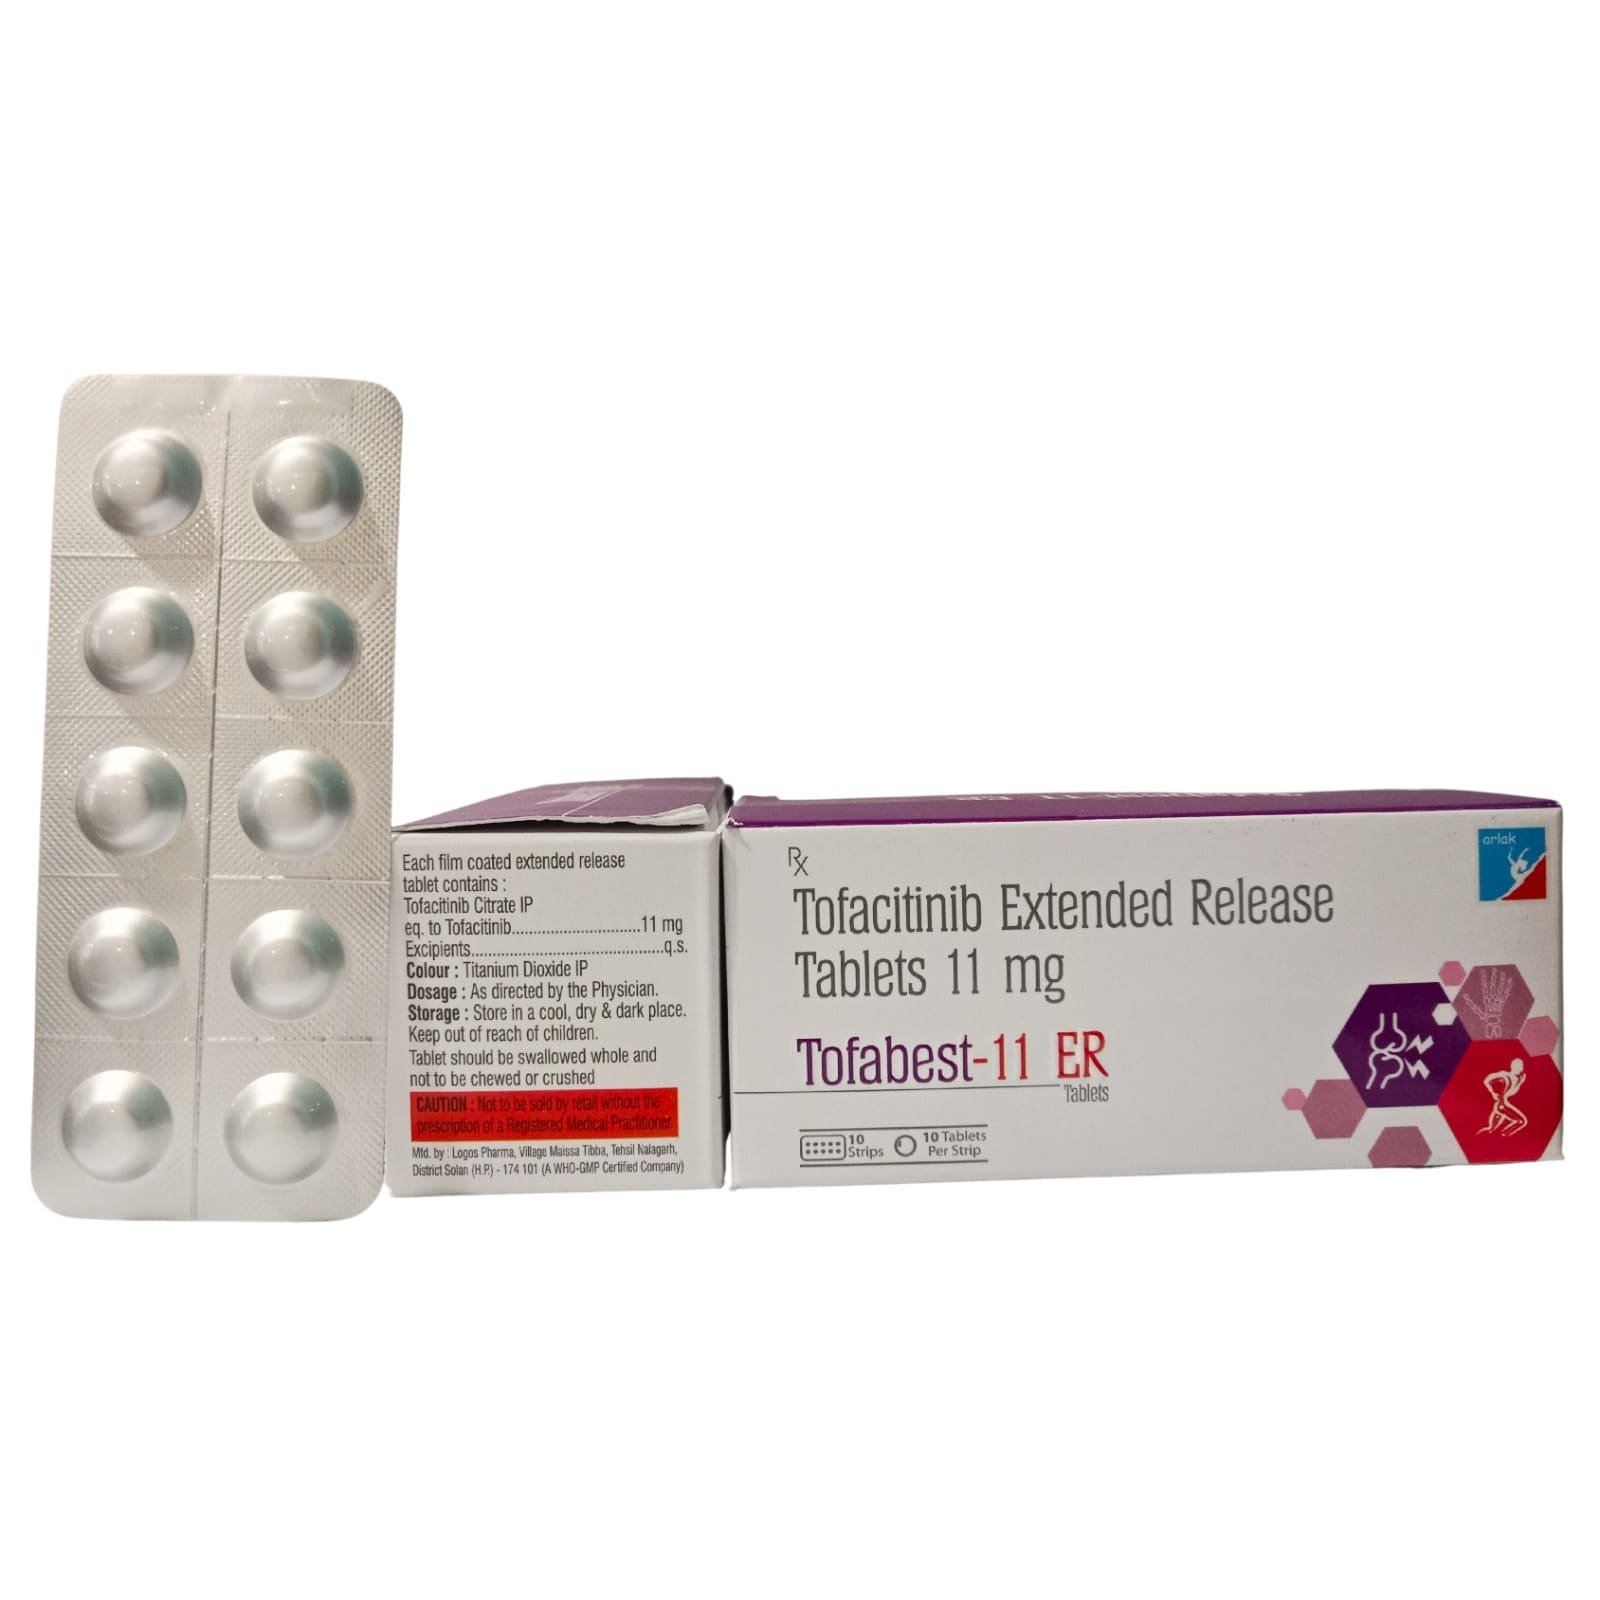 Tofacitinib Extended Release Tablets 11 mg